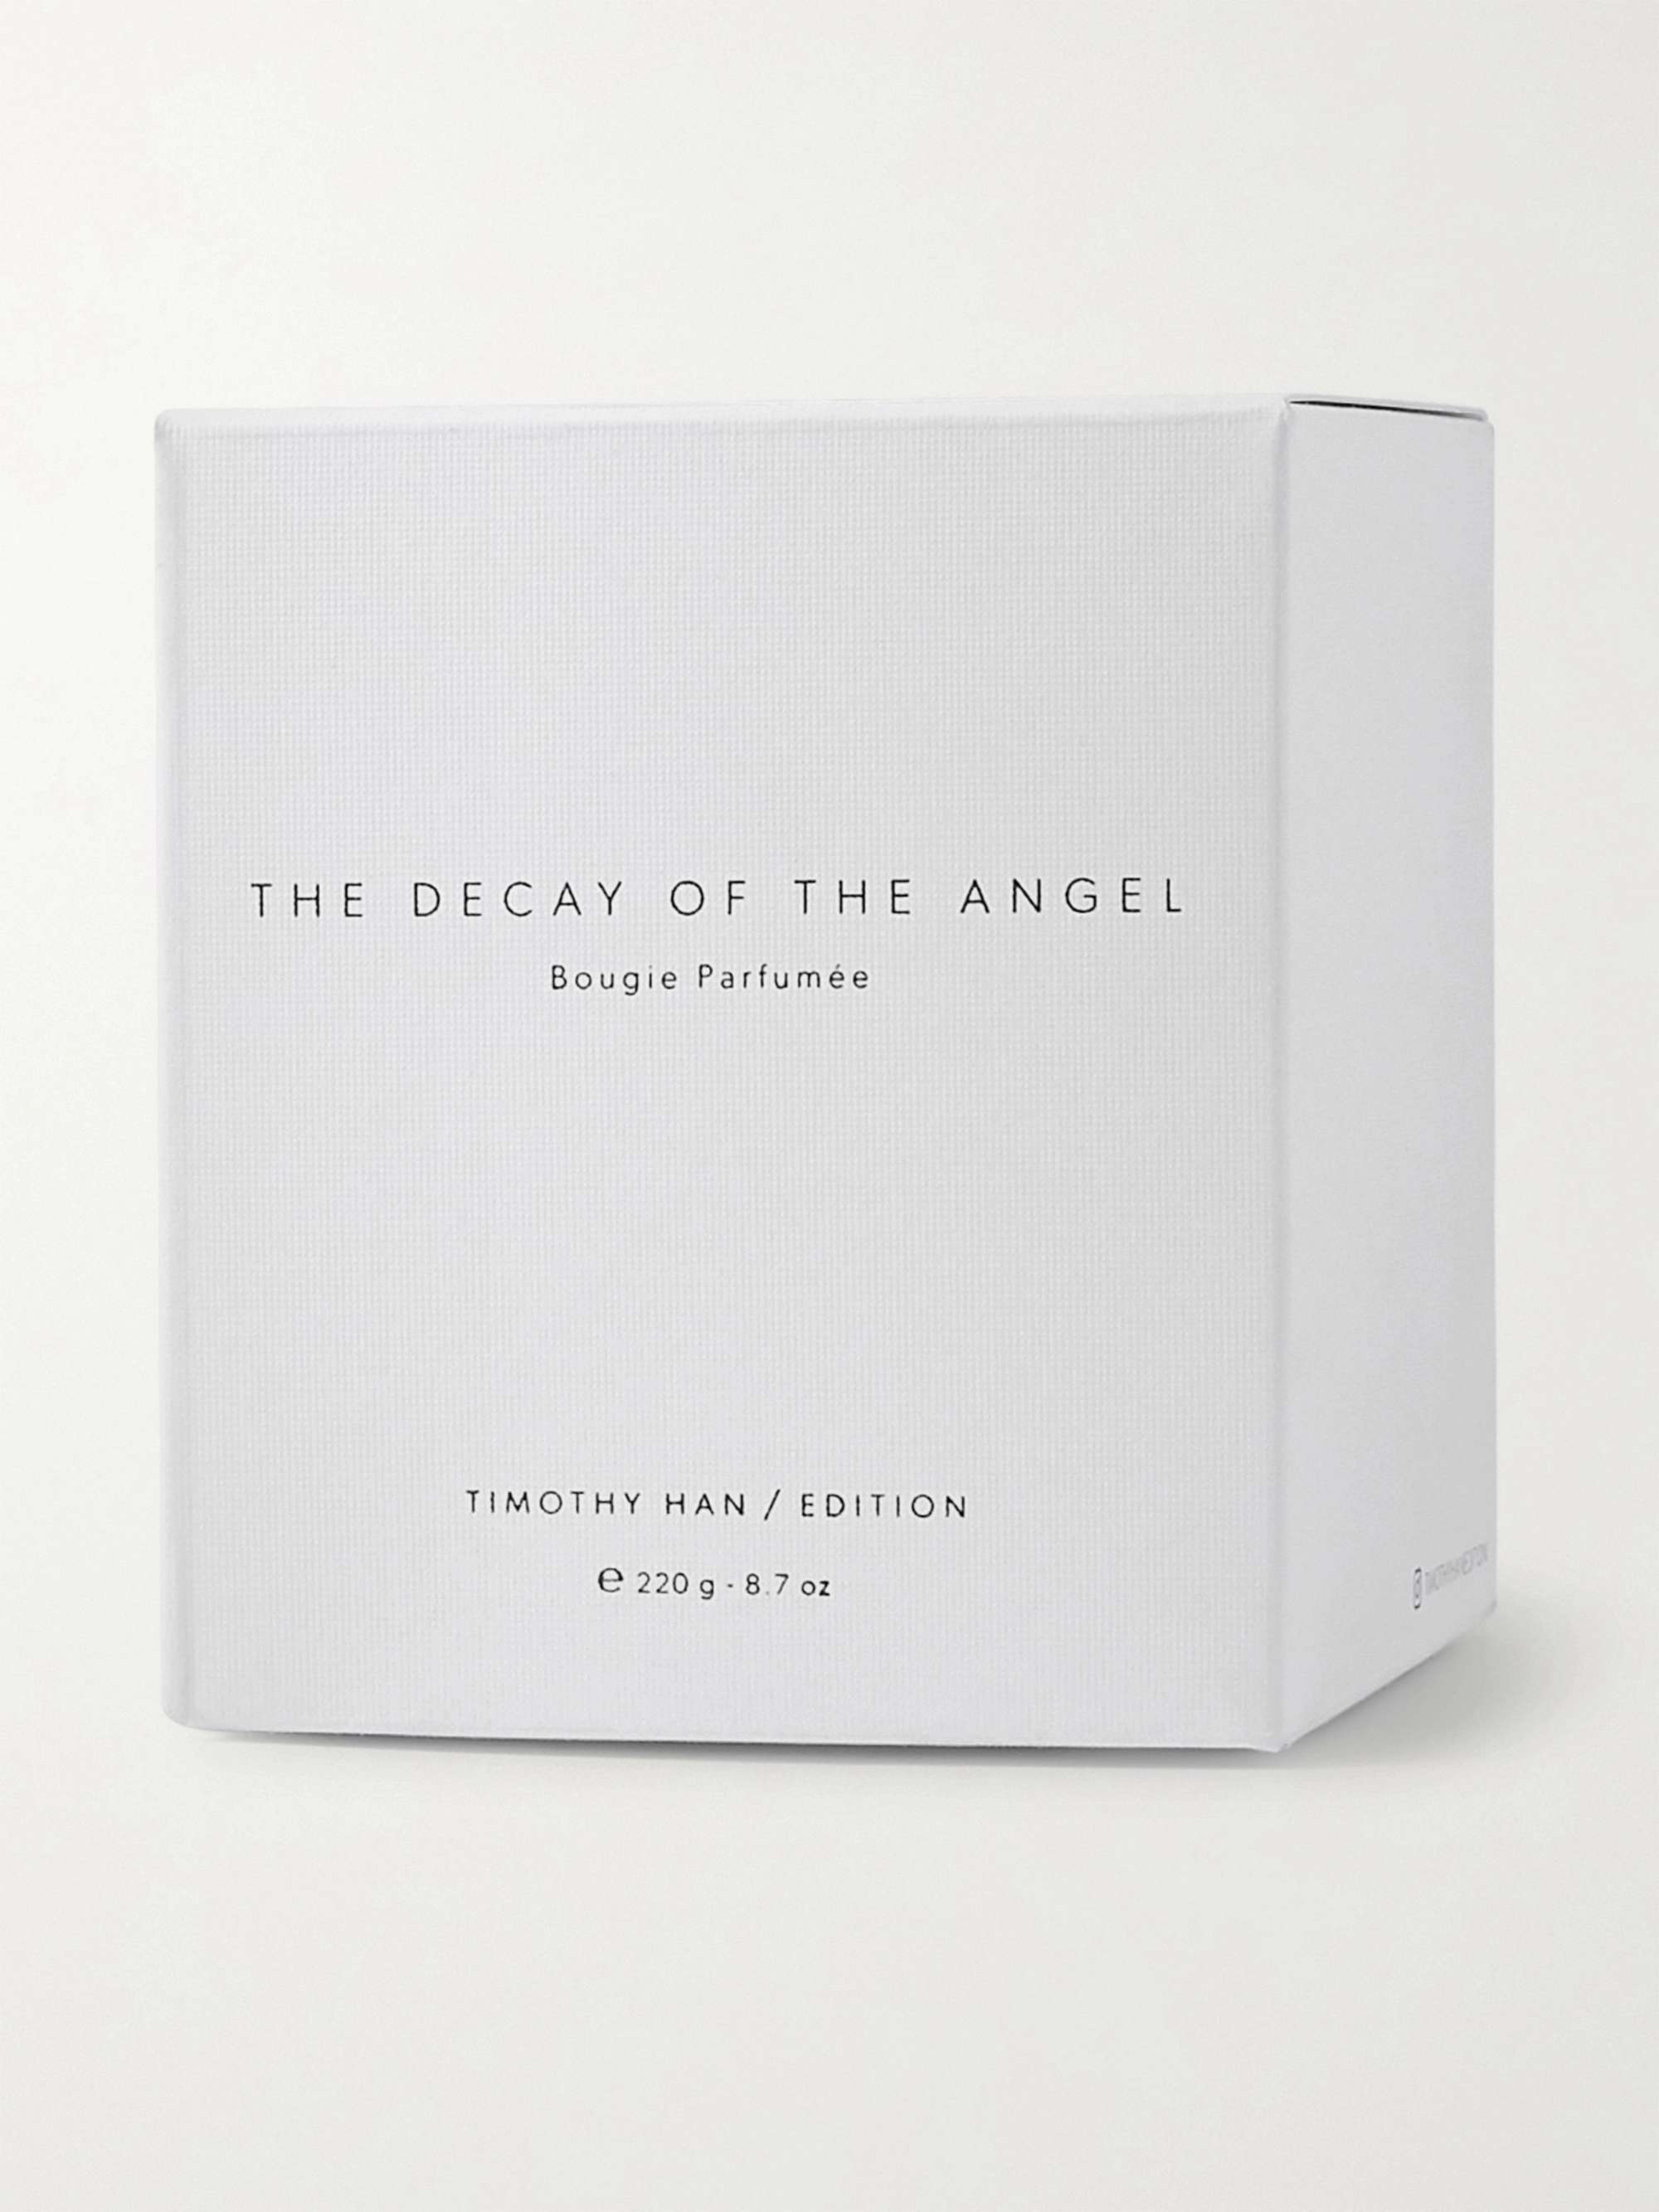 TIMOTHY HAN / EDITION The Decay of the Angel Scented Candle, 220g